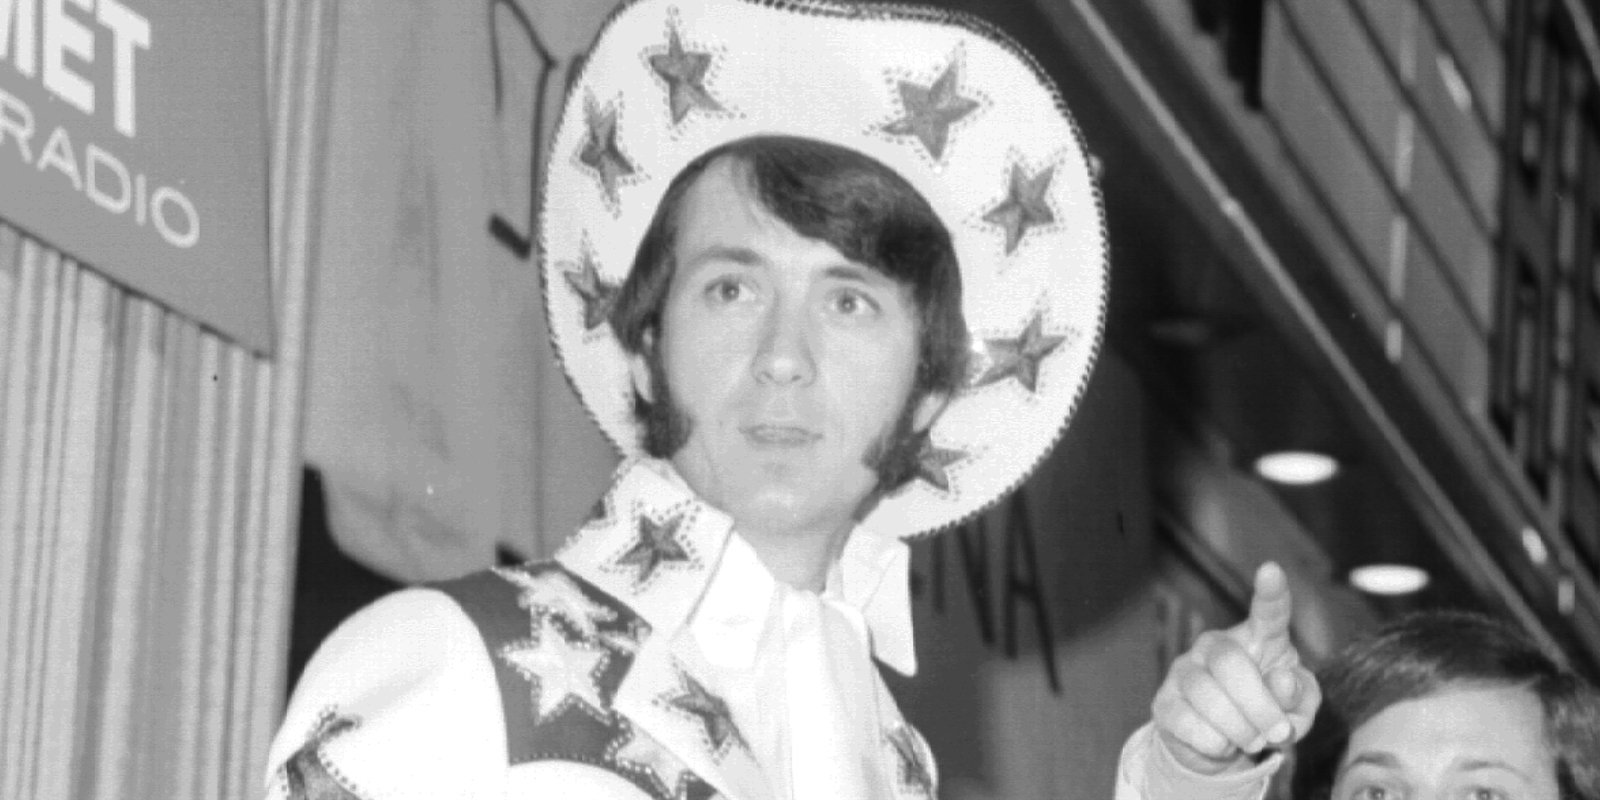 Mike Nesmith wears a Nudie cowboy suit at a red carpet event.